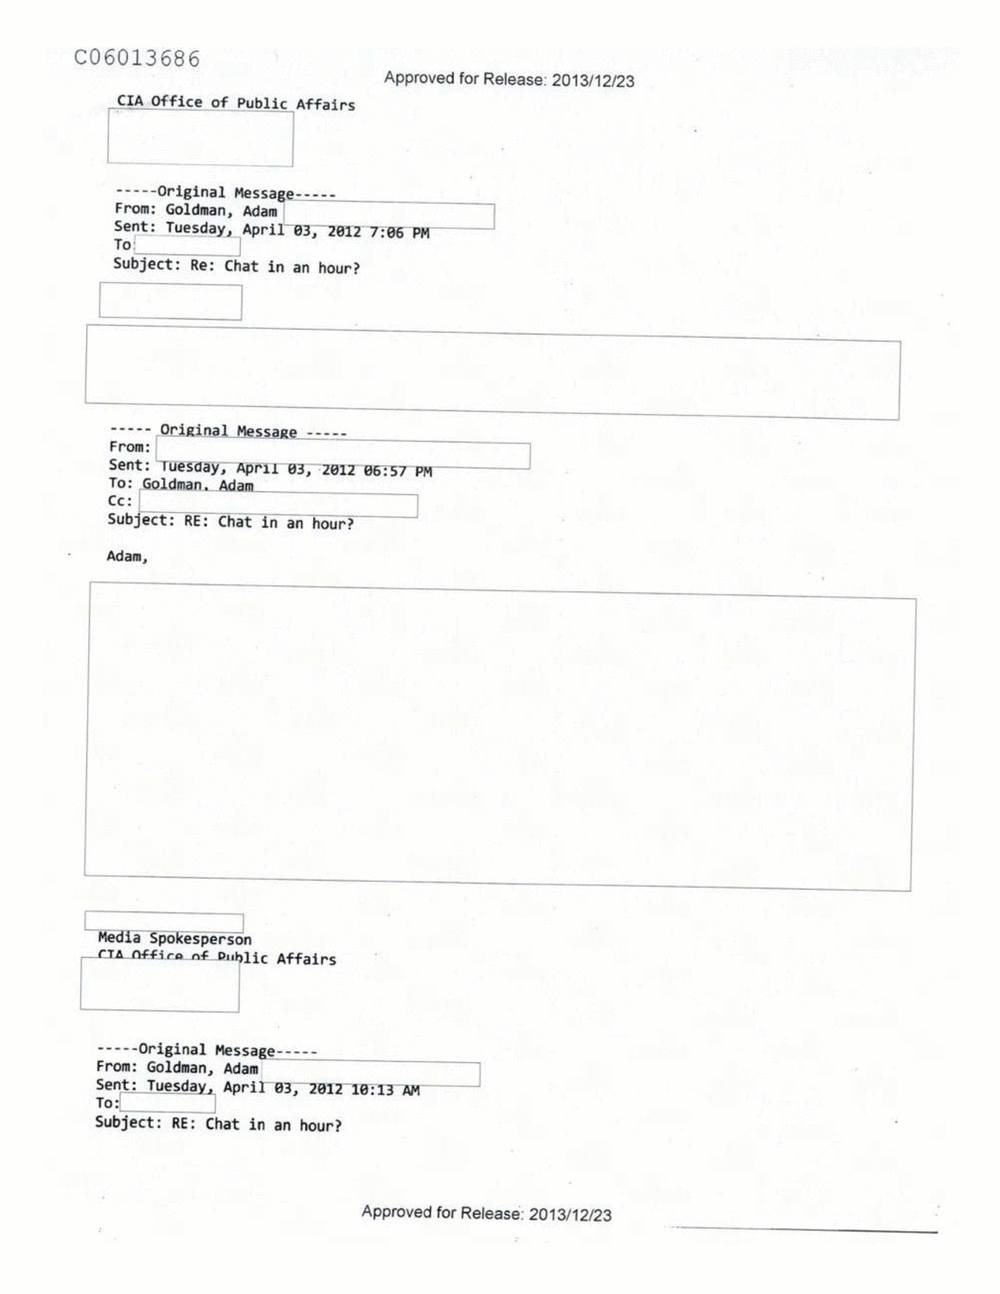 Page 542 from Email Correspondence Between Reporters and CIA Flacks